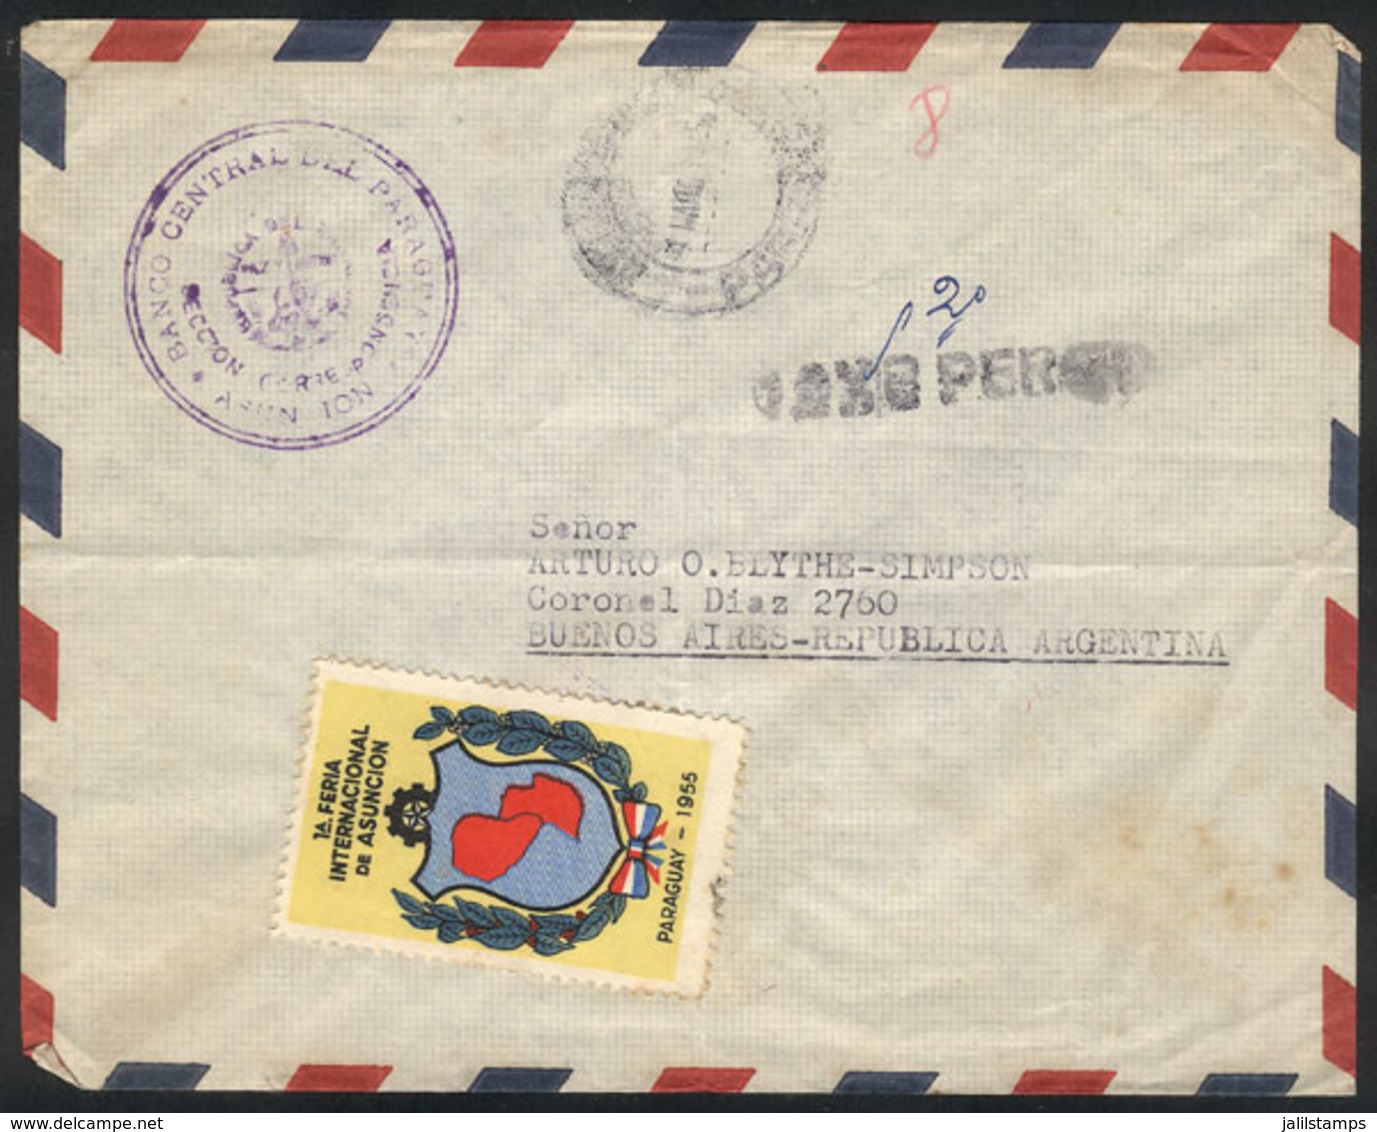 PARAGUAY: Official Envelope Of The Central Bank Of Paraguay, Sent Without Postage To Argentina On 1/MAR/1955, With Inter - Paraguay